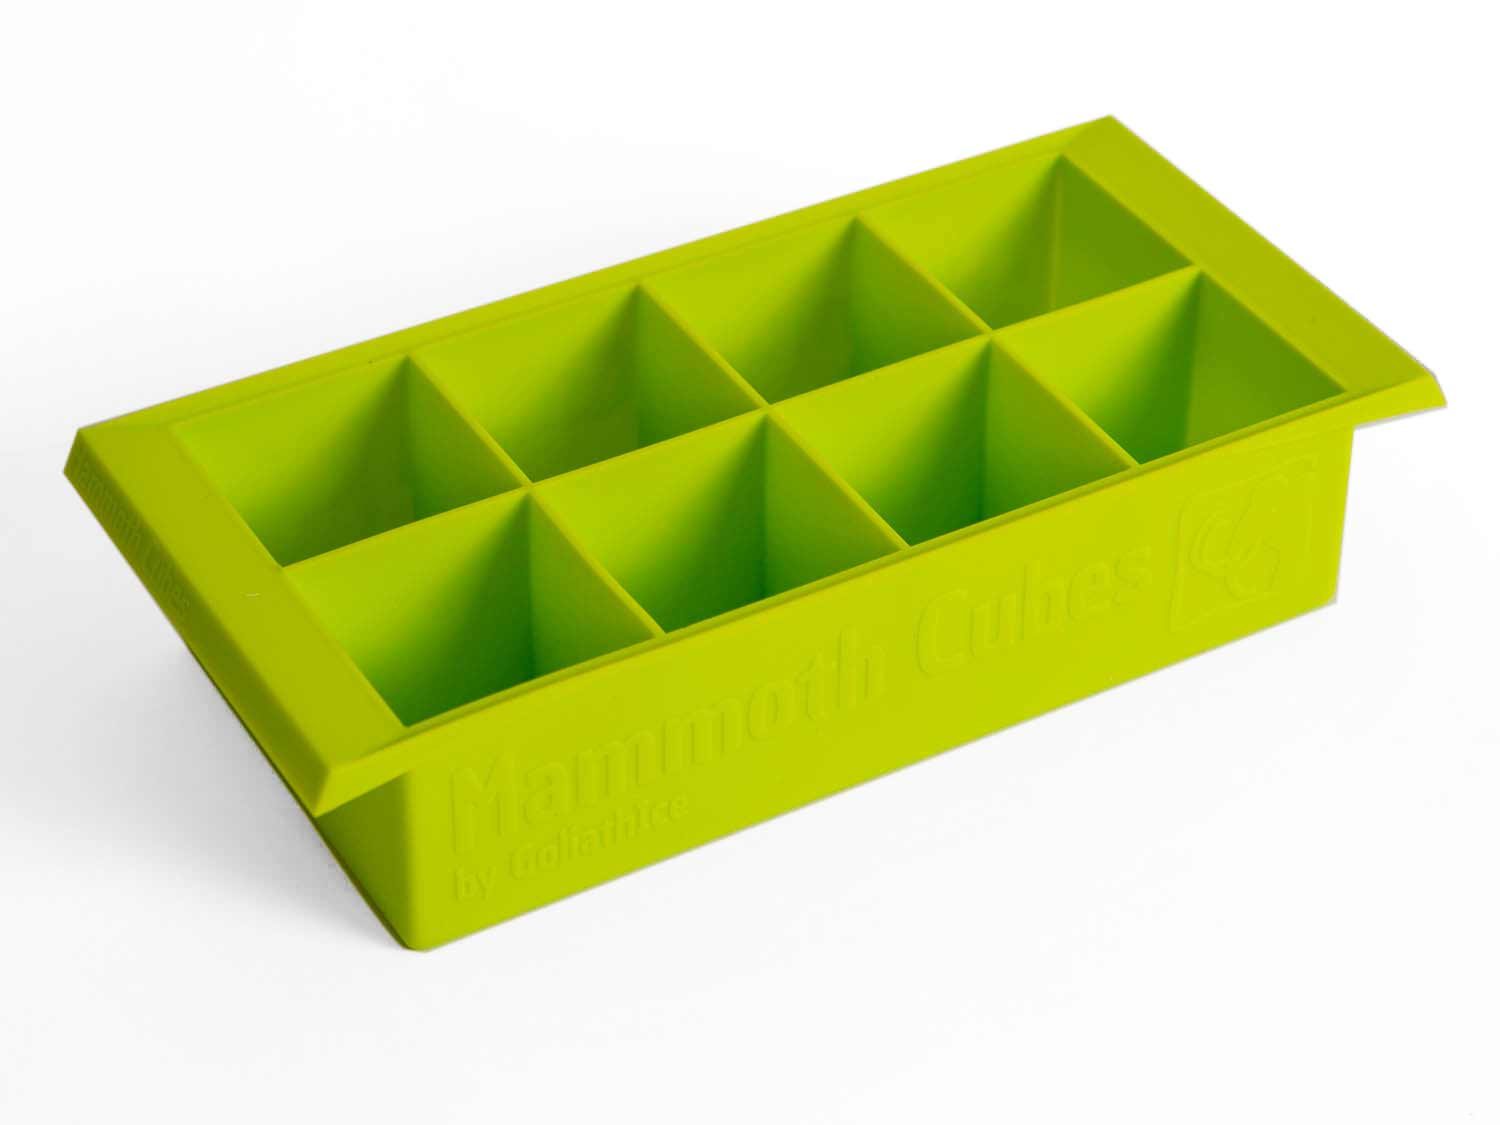 A green ice cube tray for large cubes